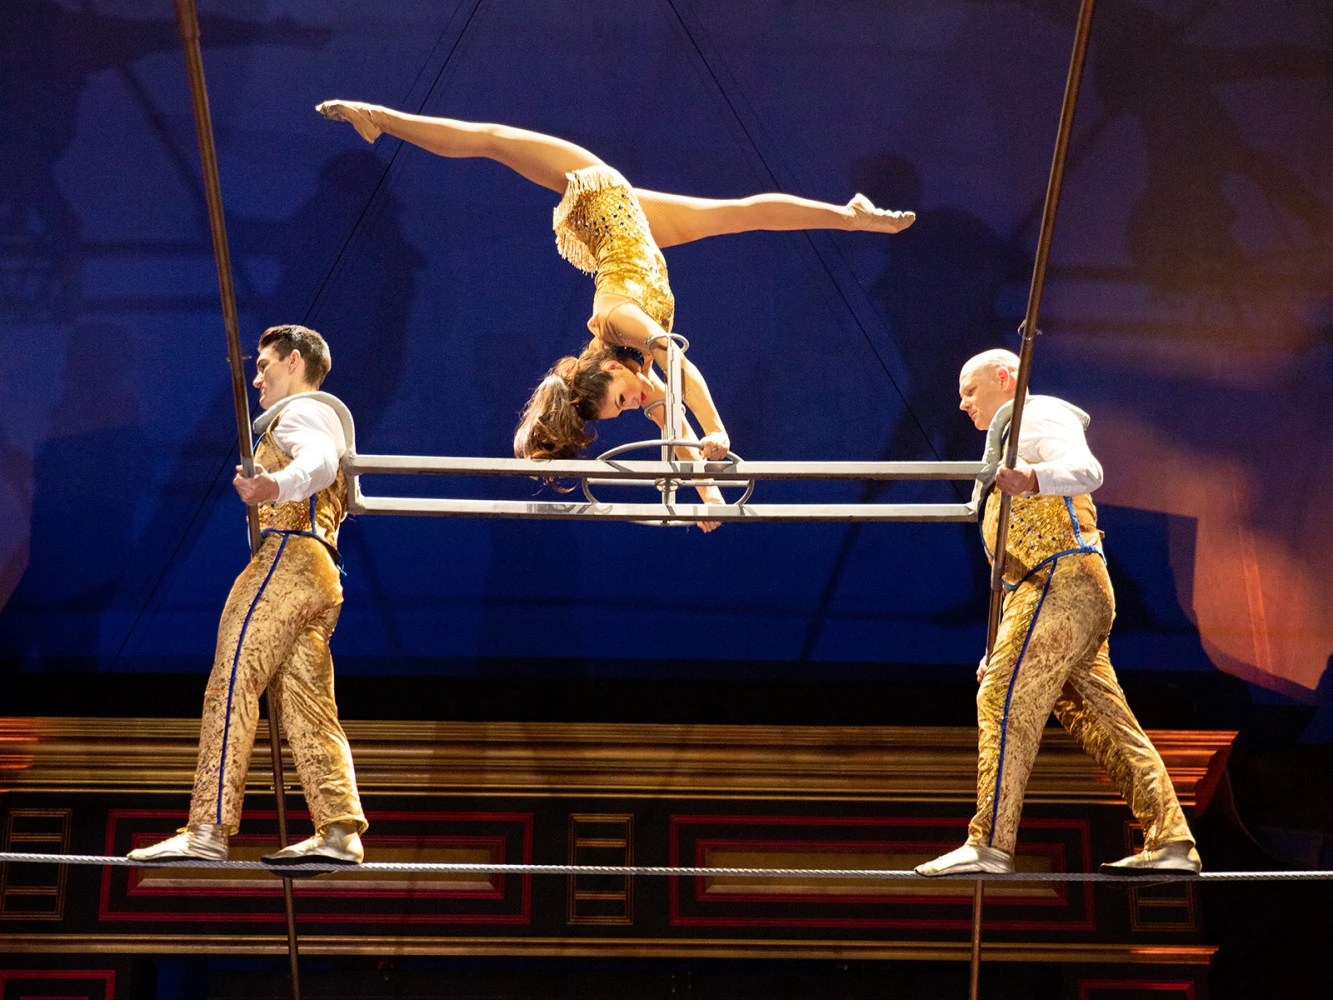 Big Apple Circus: What to expect - 9